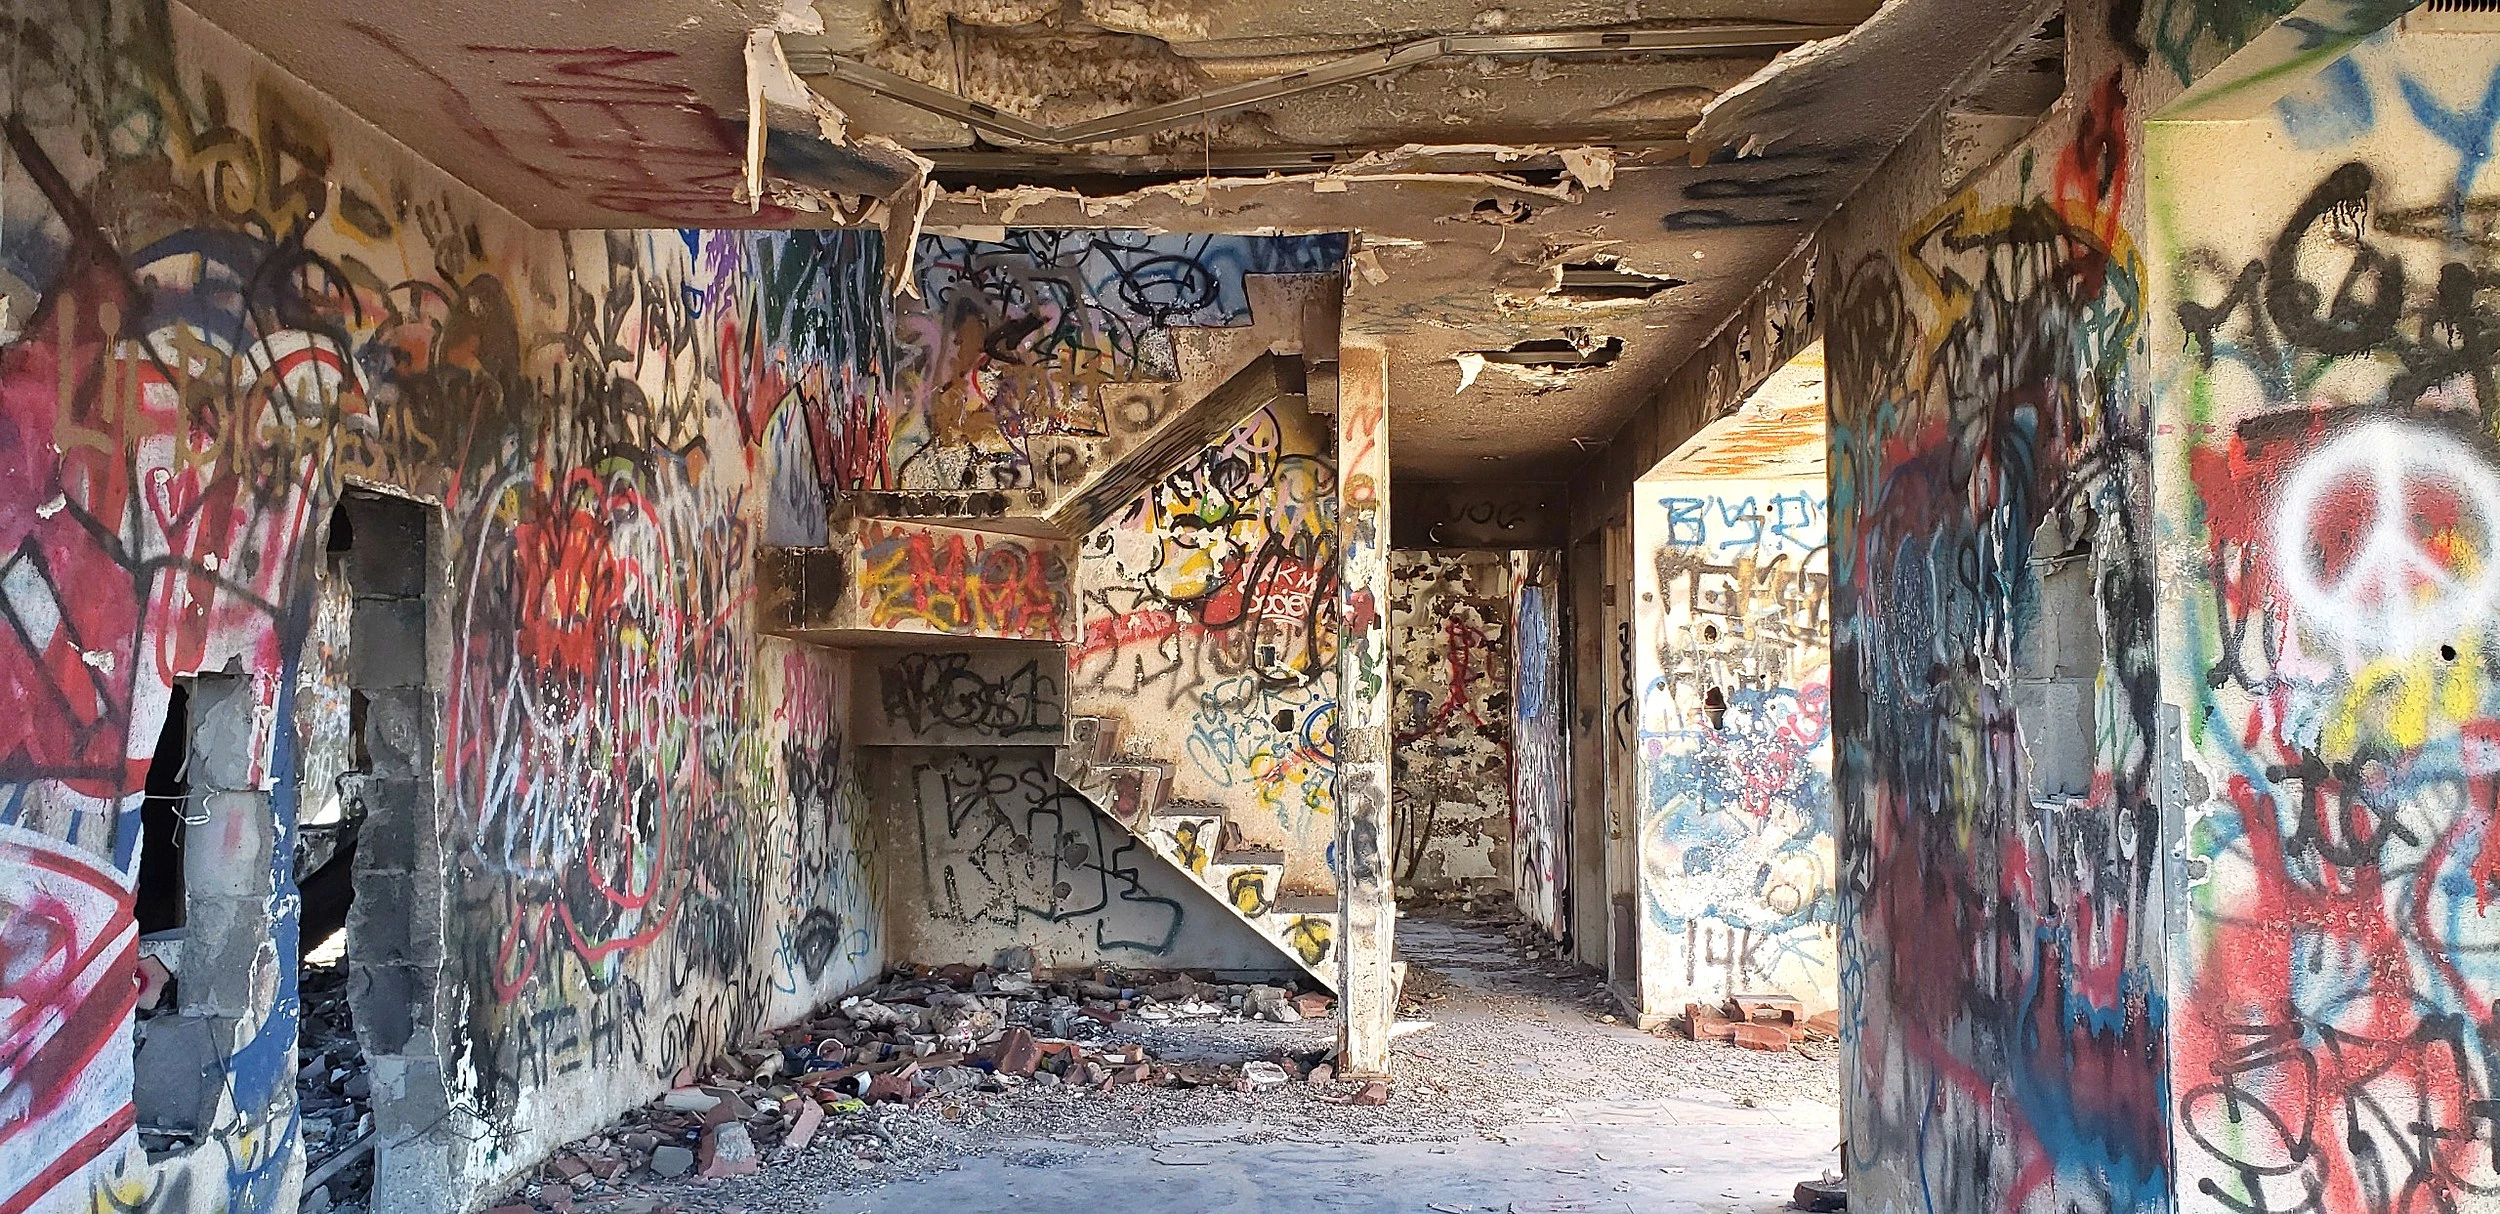 Abandoned Orphanage In El Paso Is It Really Haunted or Not? photo photo